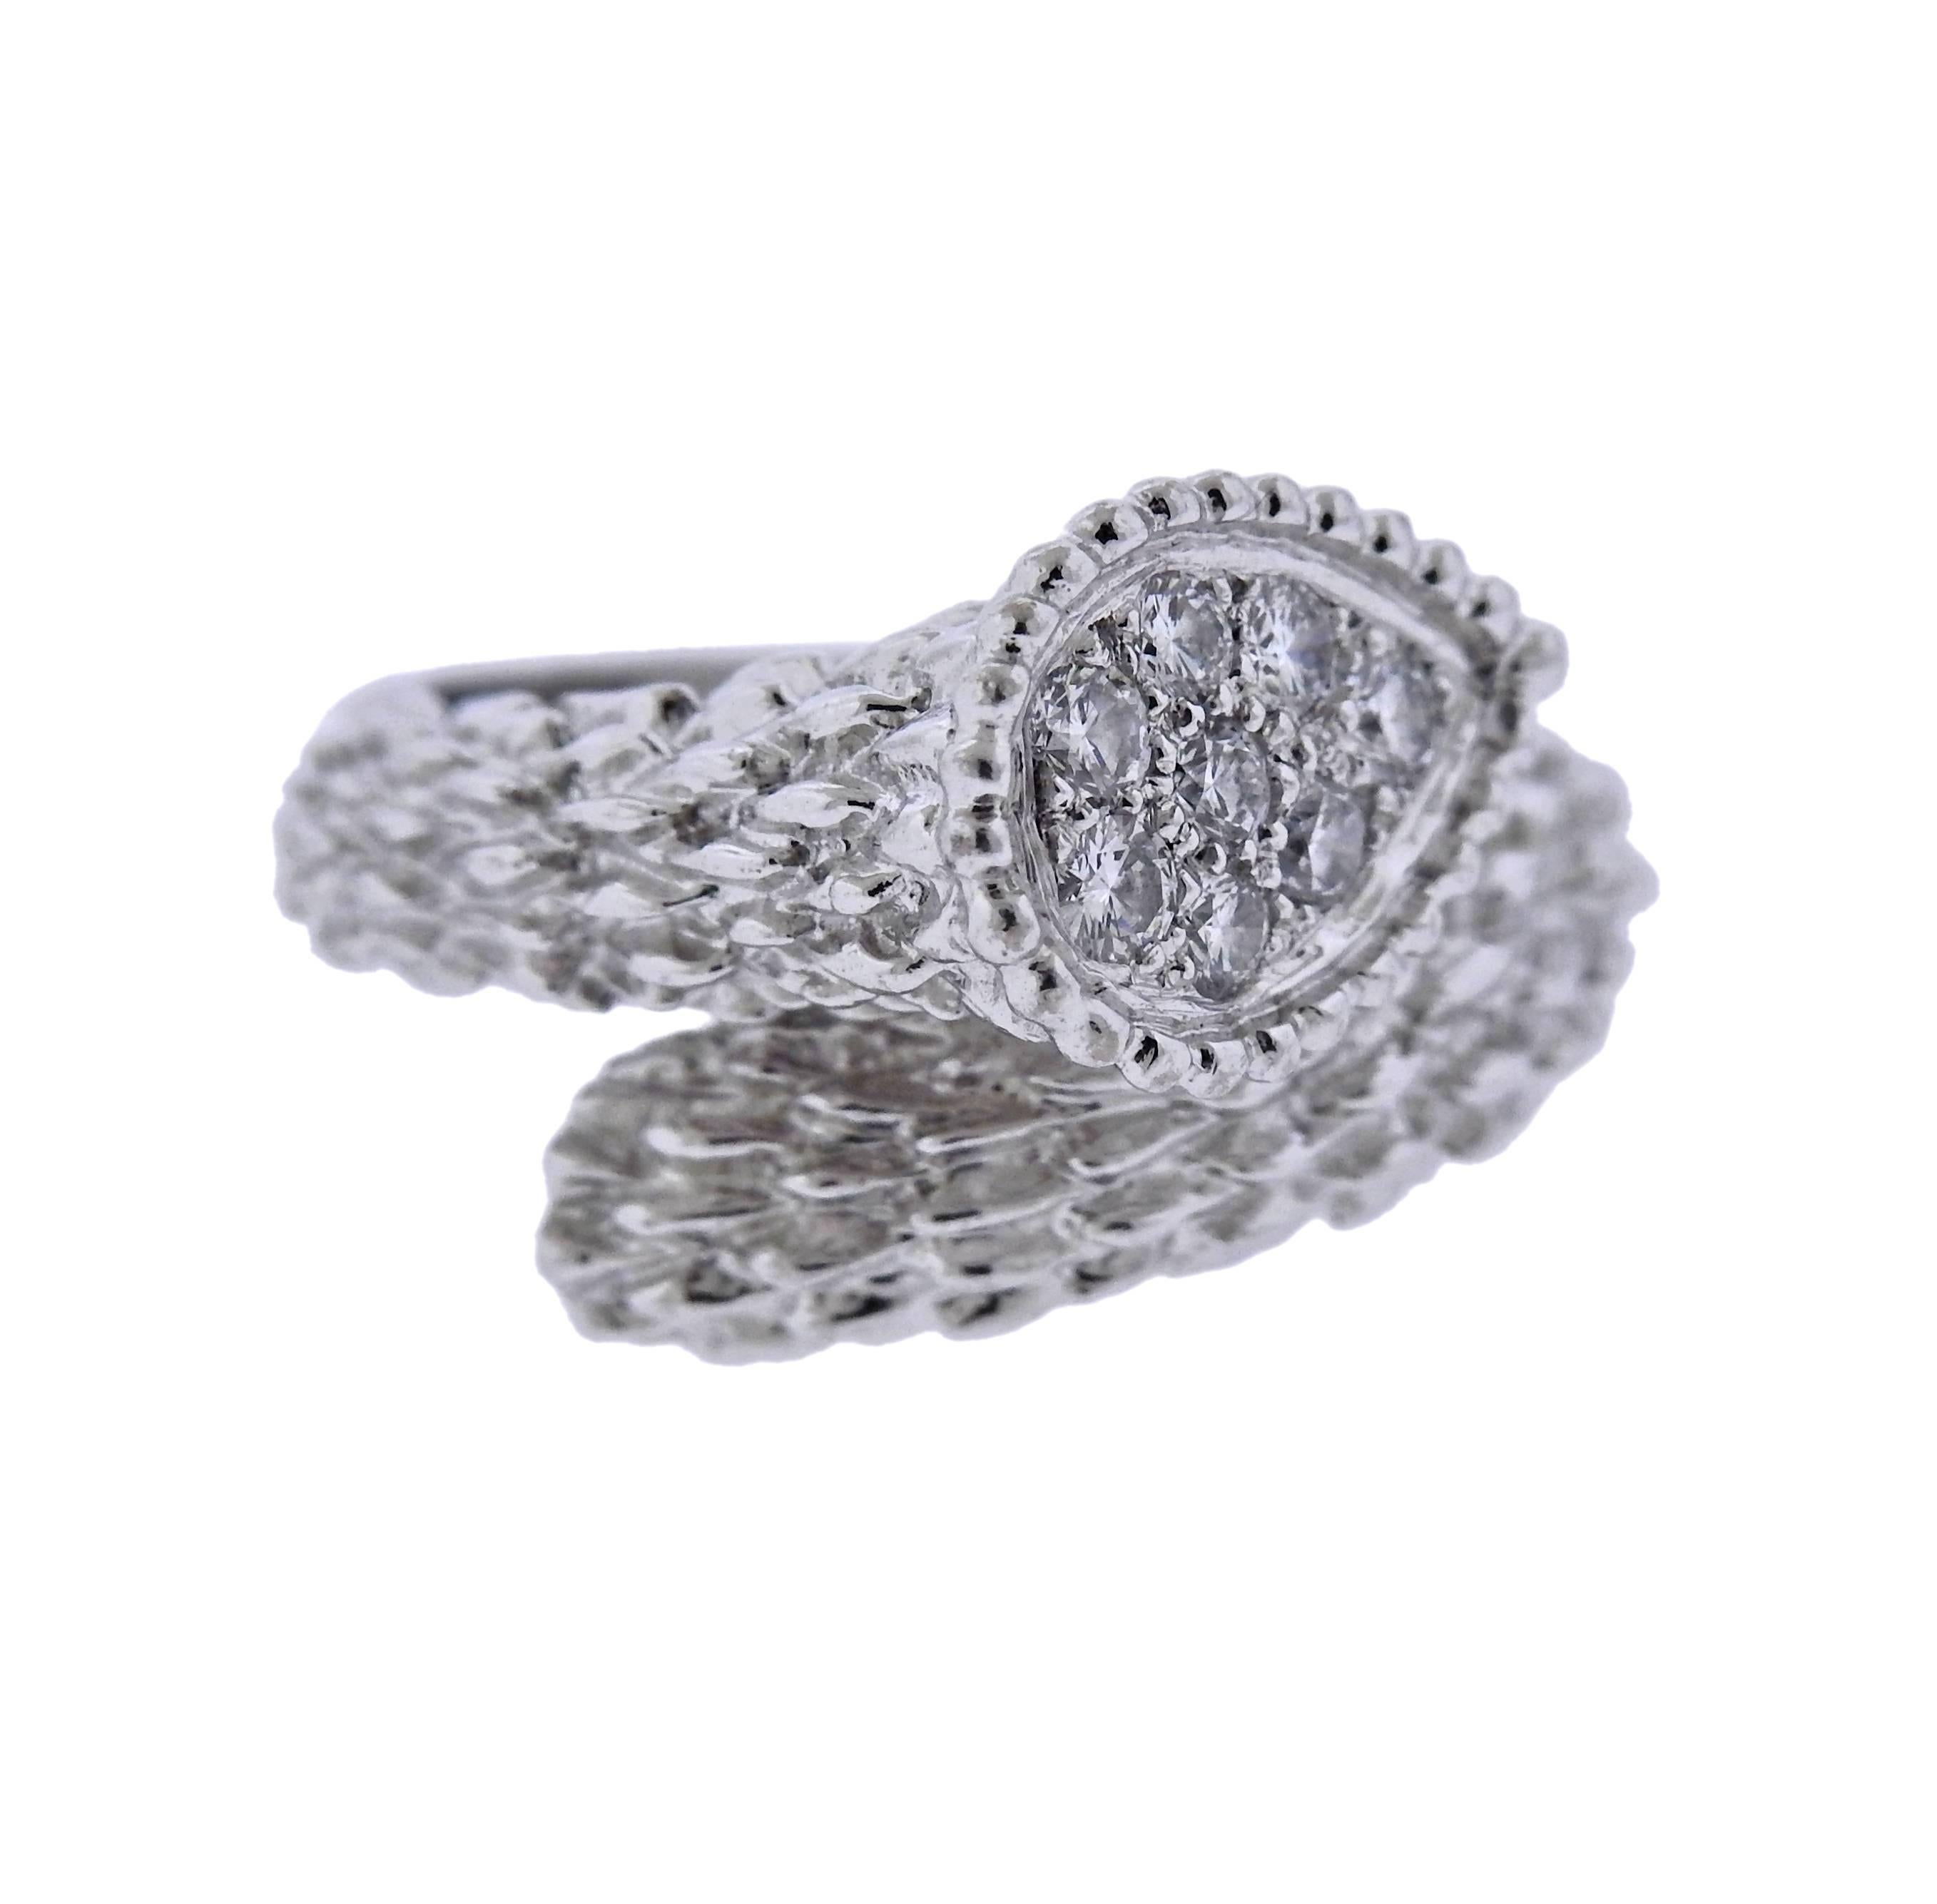 18k white gold Serpent Boheme ring, crafted by Boucheron, adorned with approx. 0.24ctw in diamonds. Ring size - 6.5, ring top is 14mm wide, weighs 7.9 grams. Marked: Boucheron, 52, E48096, 750. 